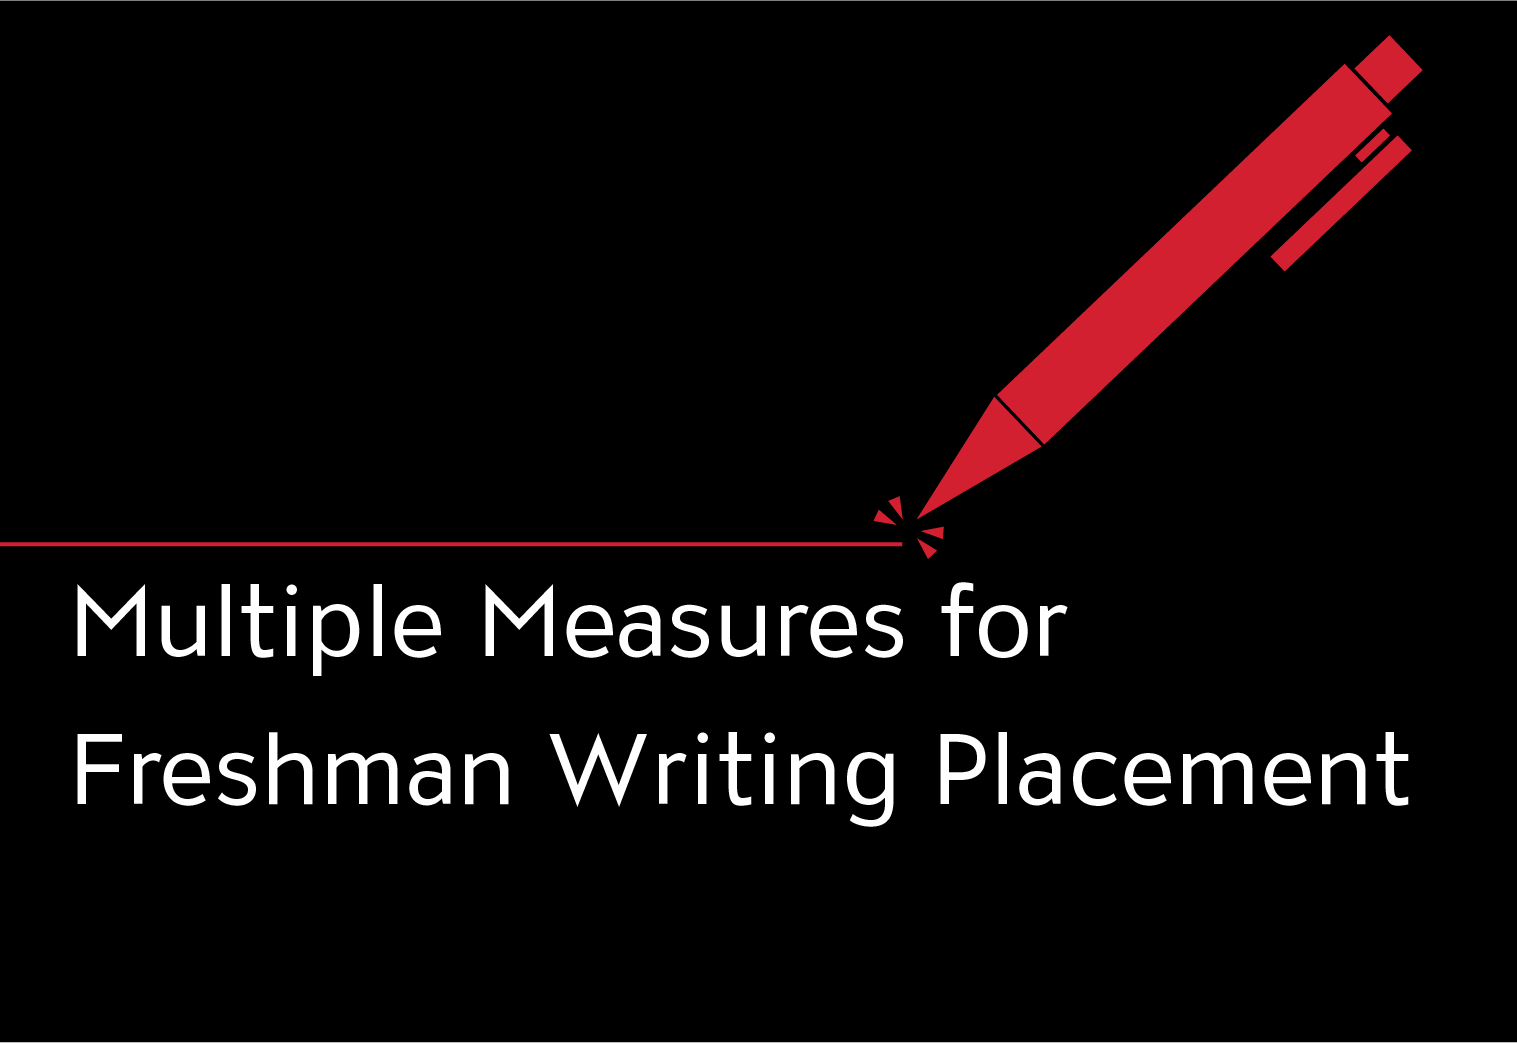 Multiple Measures for Freshman Writing Placement